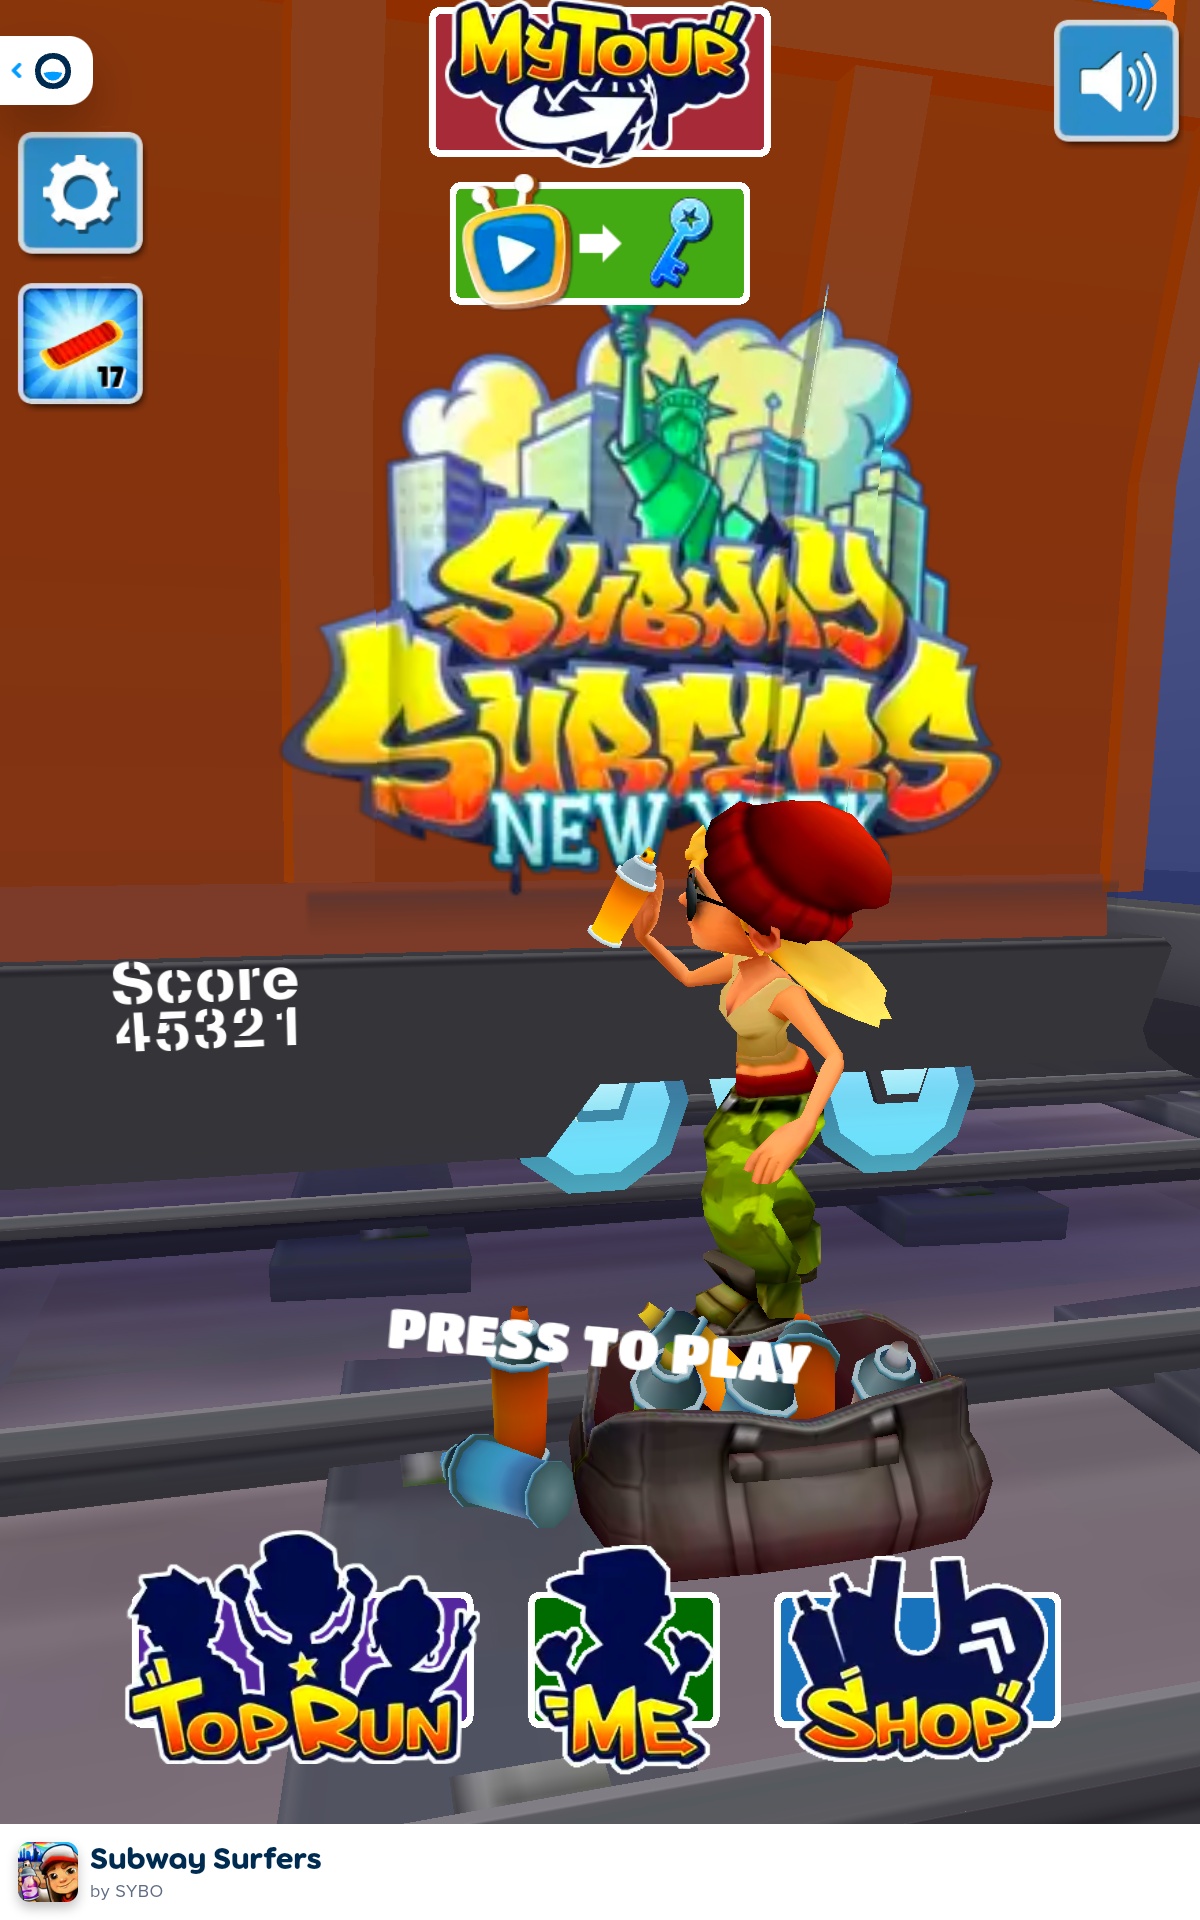 Personally, I think that poki is better because of Subway Surfers